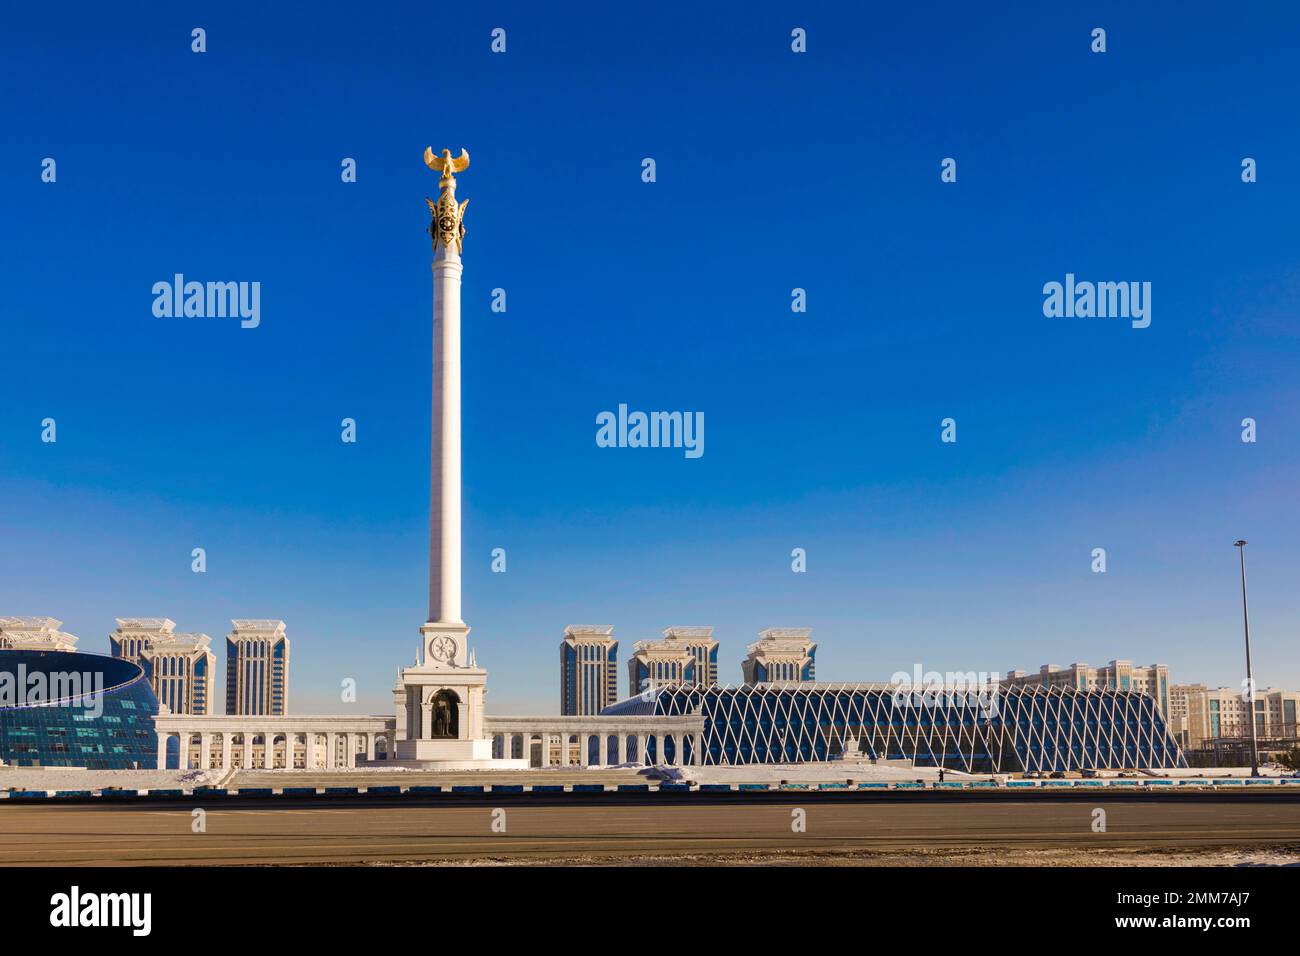 Kazakh Eli (The Country of Kazakhs) monument on Independence Square in Astana Kazakhstan with Palace of Independence seen in background Stock Photo